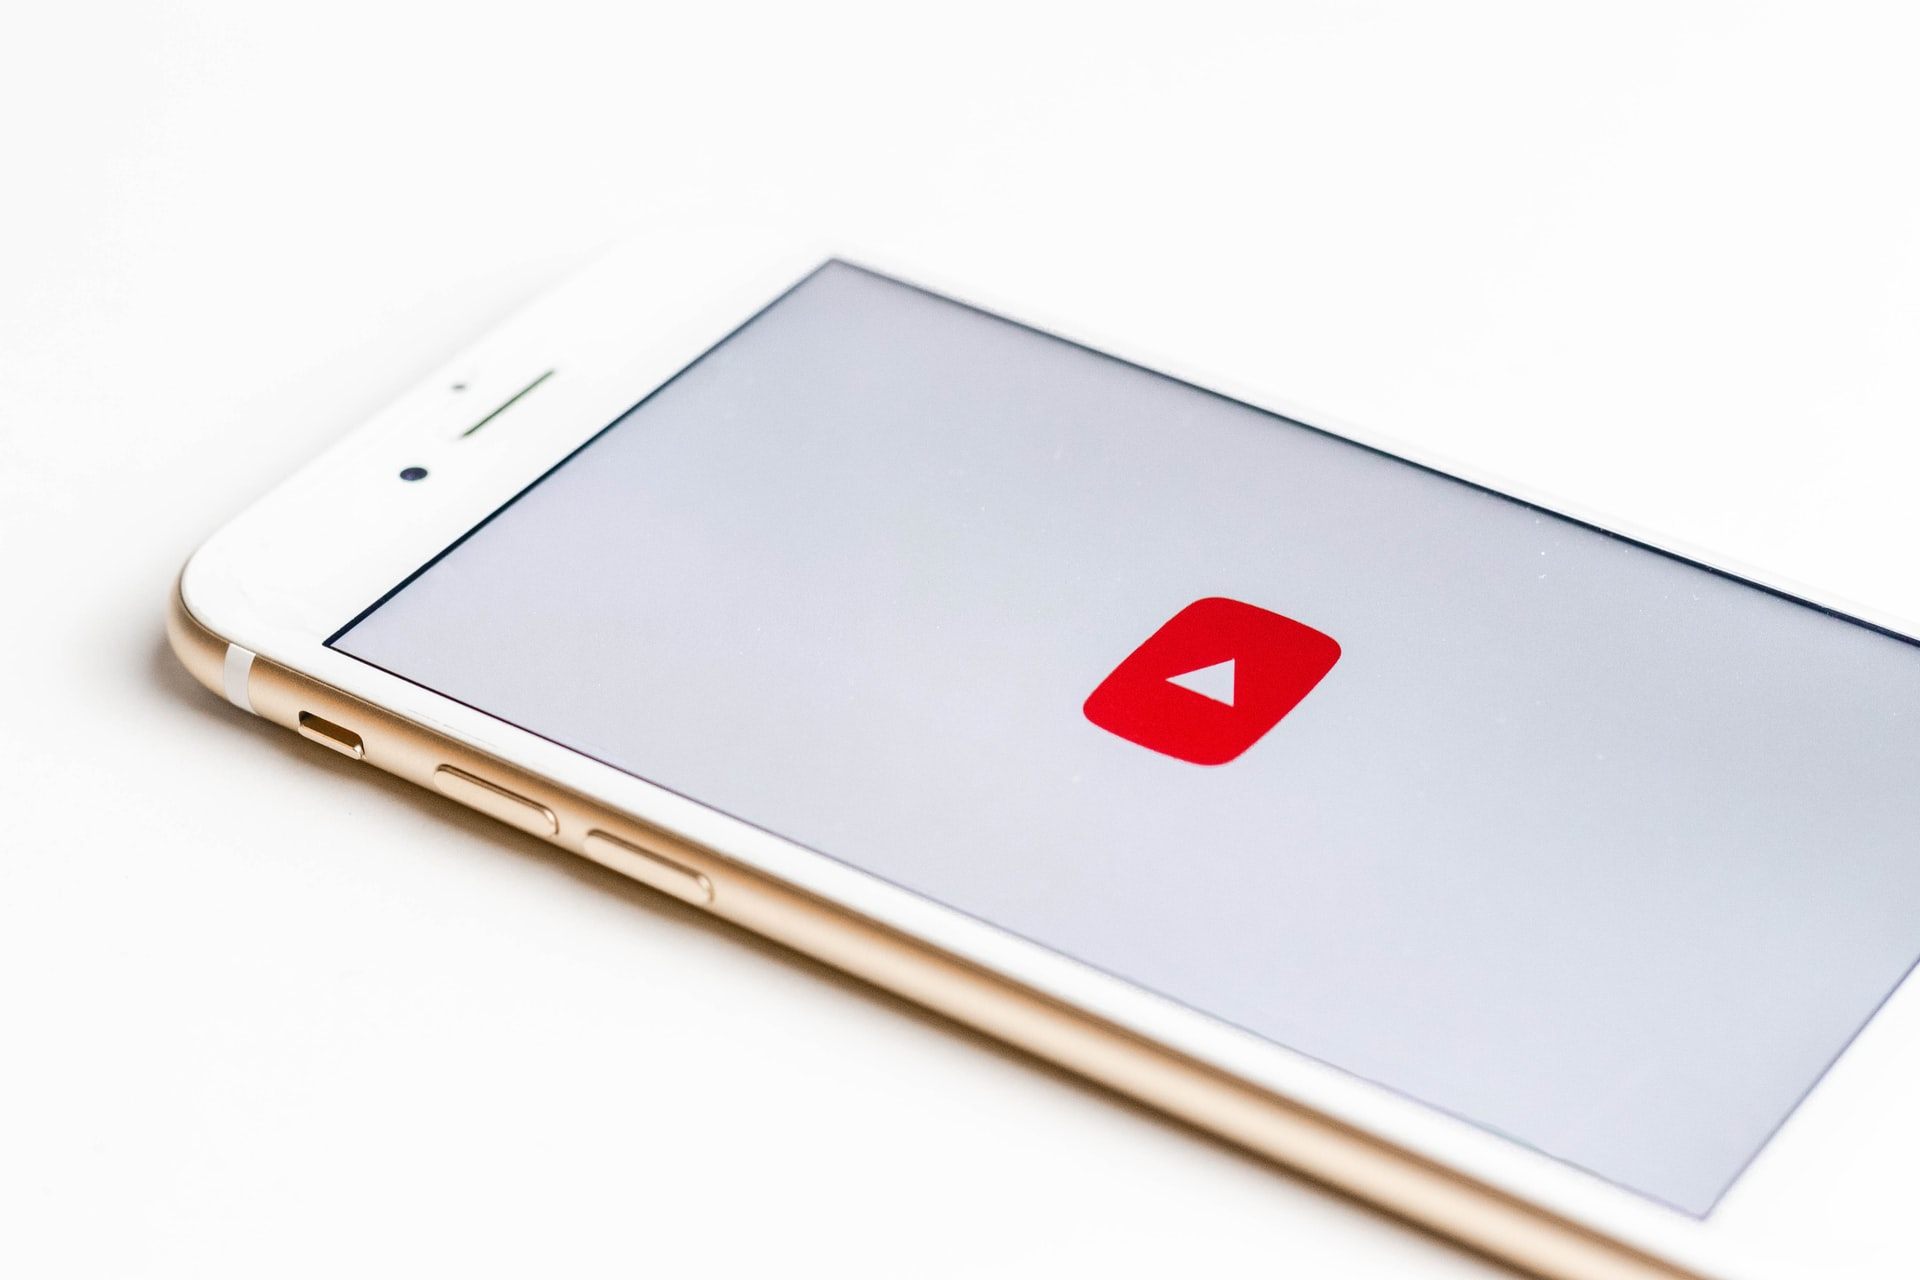 Find Out How it Is Possible to Listen to a Video on YouTube with the App Closed